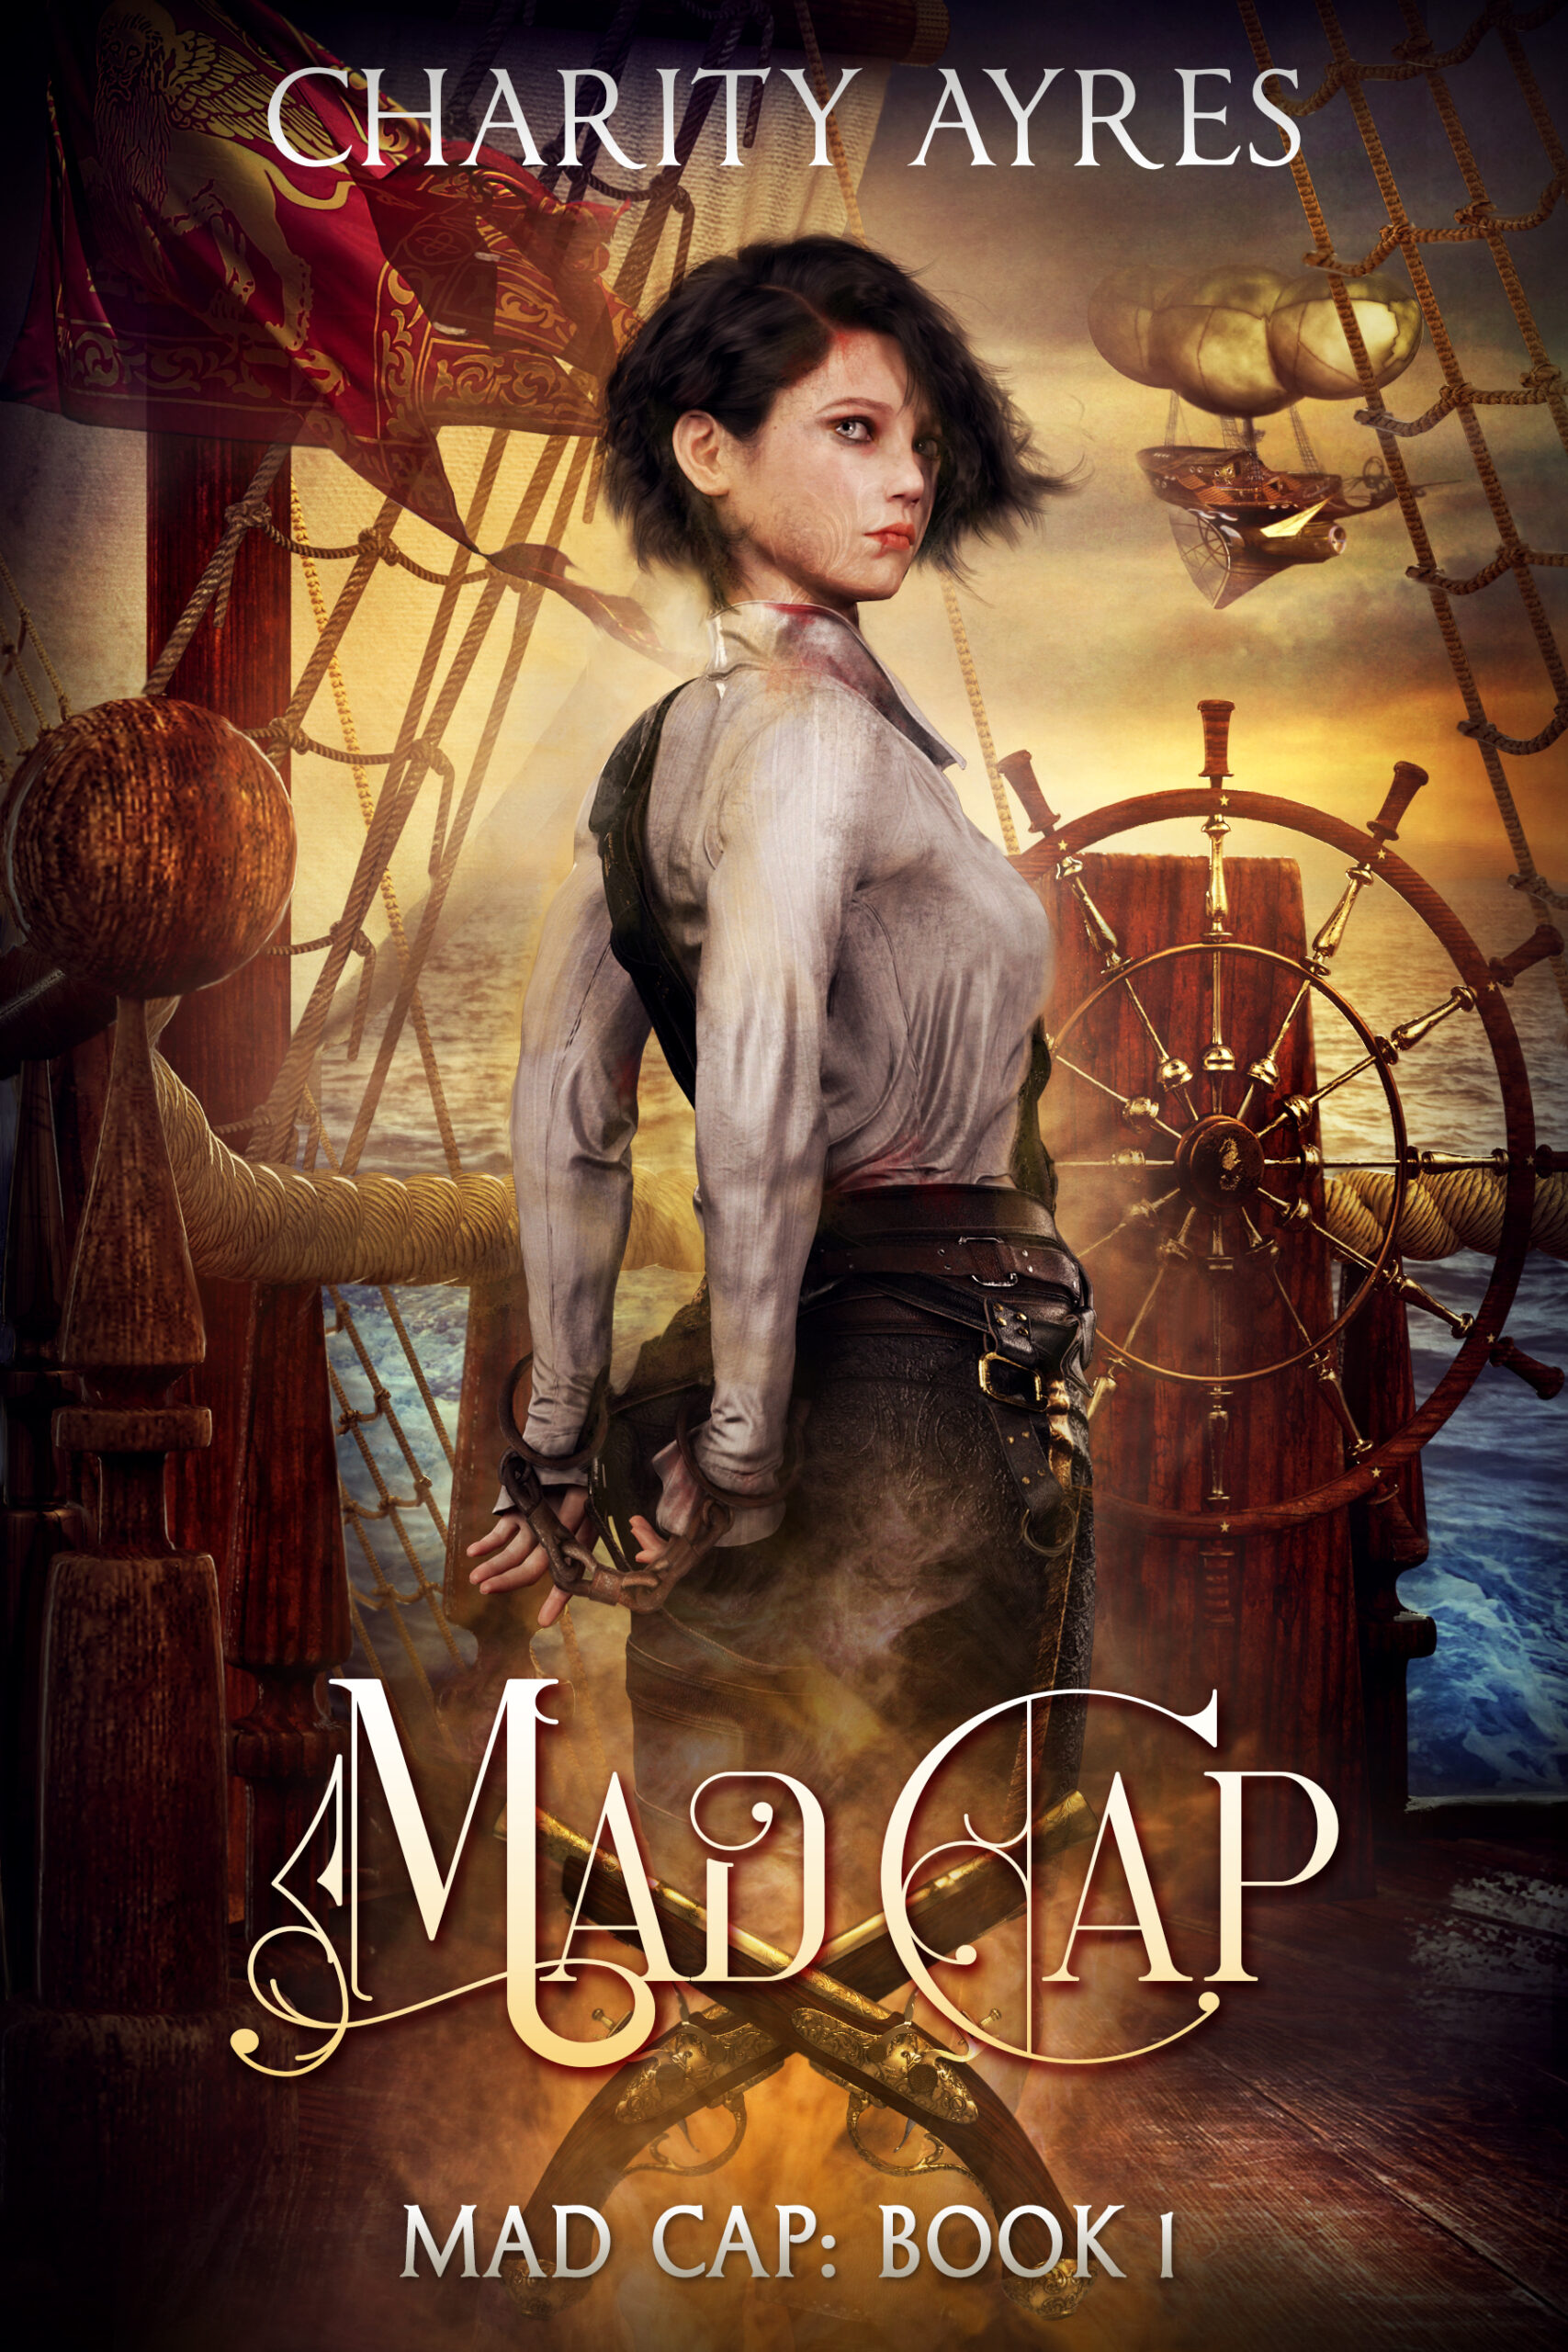 Release Day! MadCap, the exciting new adventure novel from author Charity Ayres is now available in Ebook and Print!